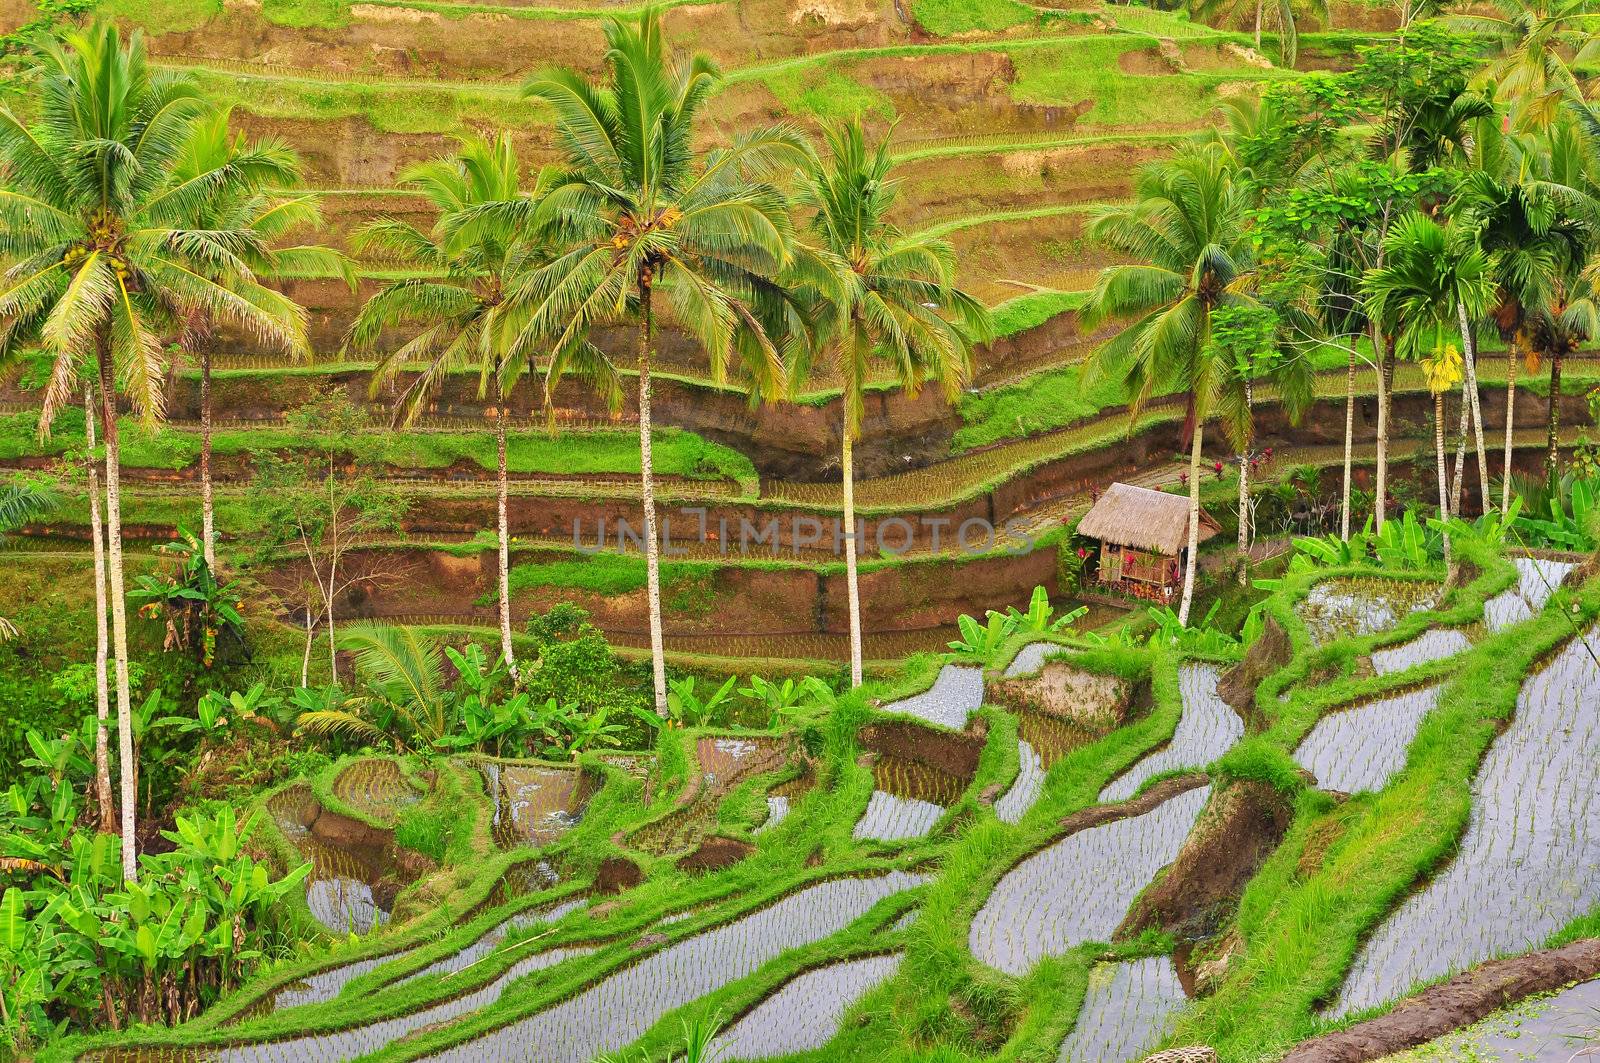 Balinese rice fields terrace by martinm303